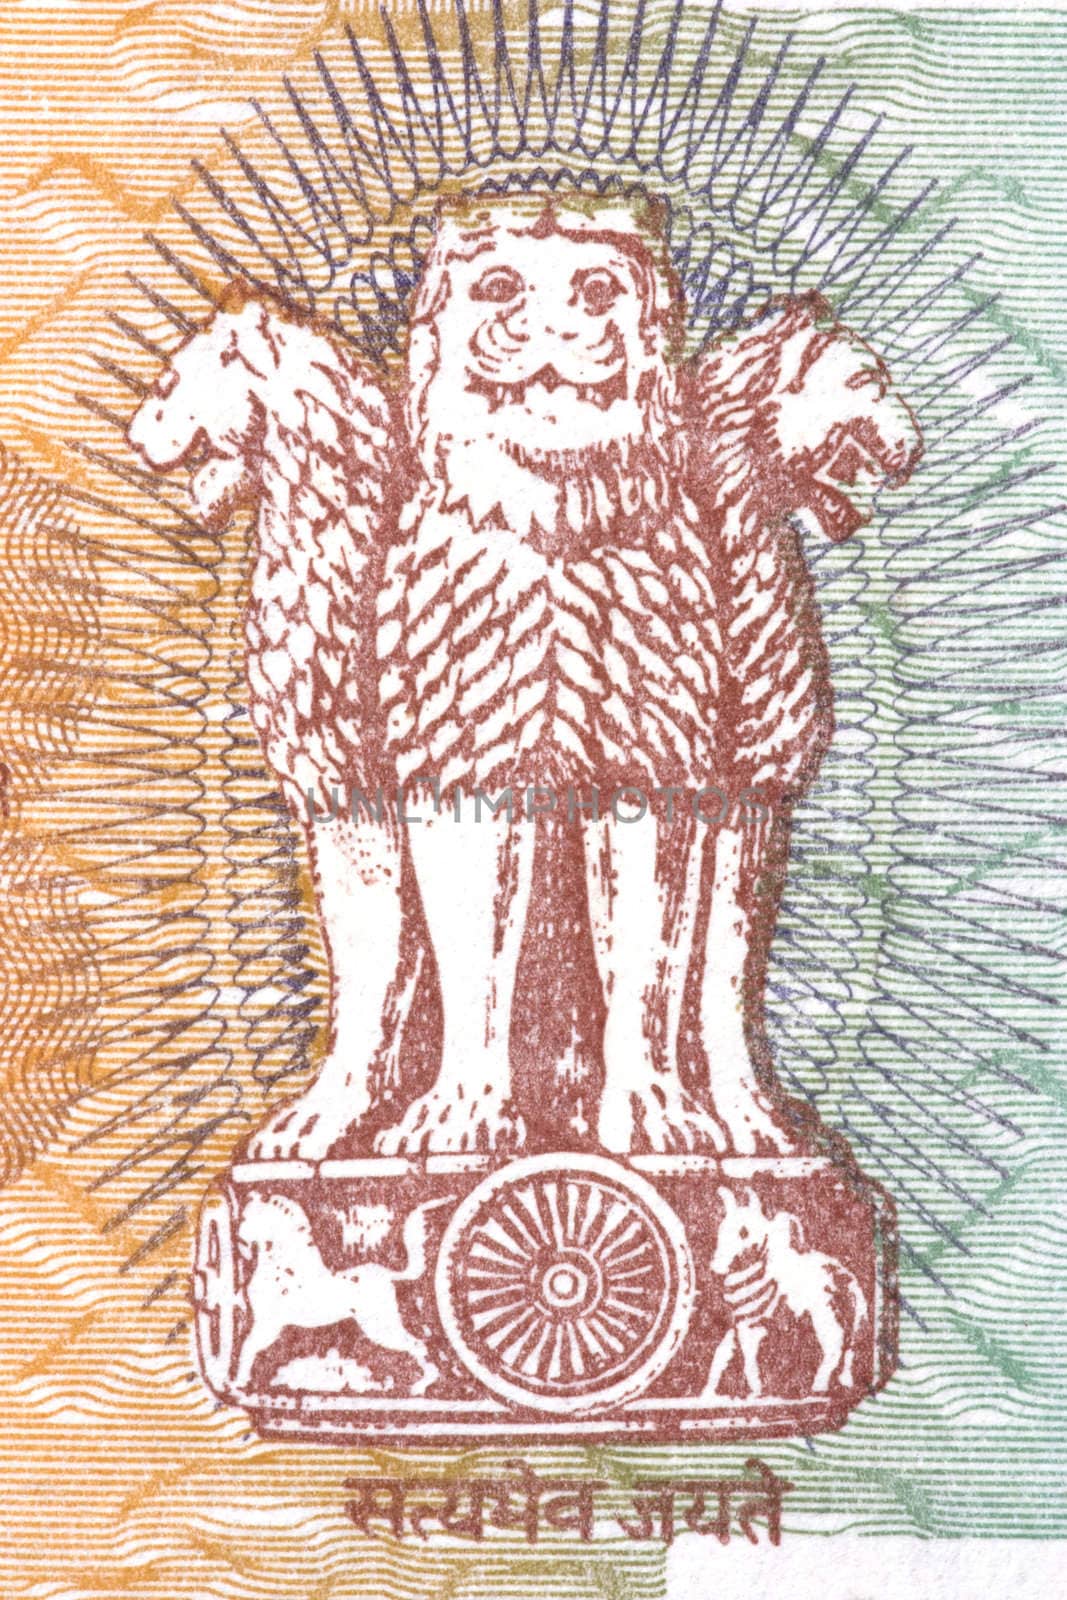 India Coat of Arms on Currency Note by shariffc